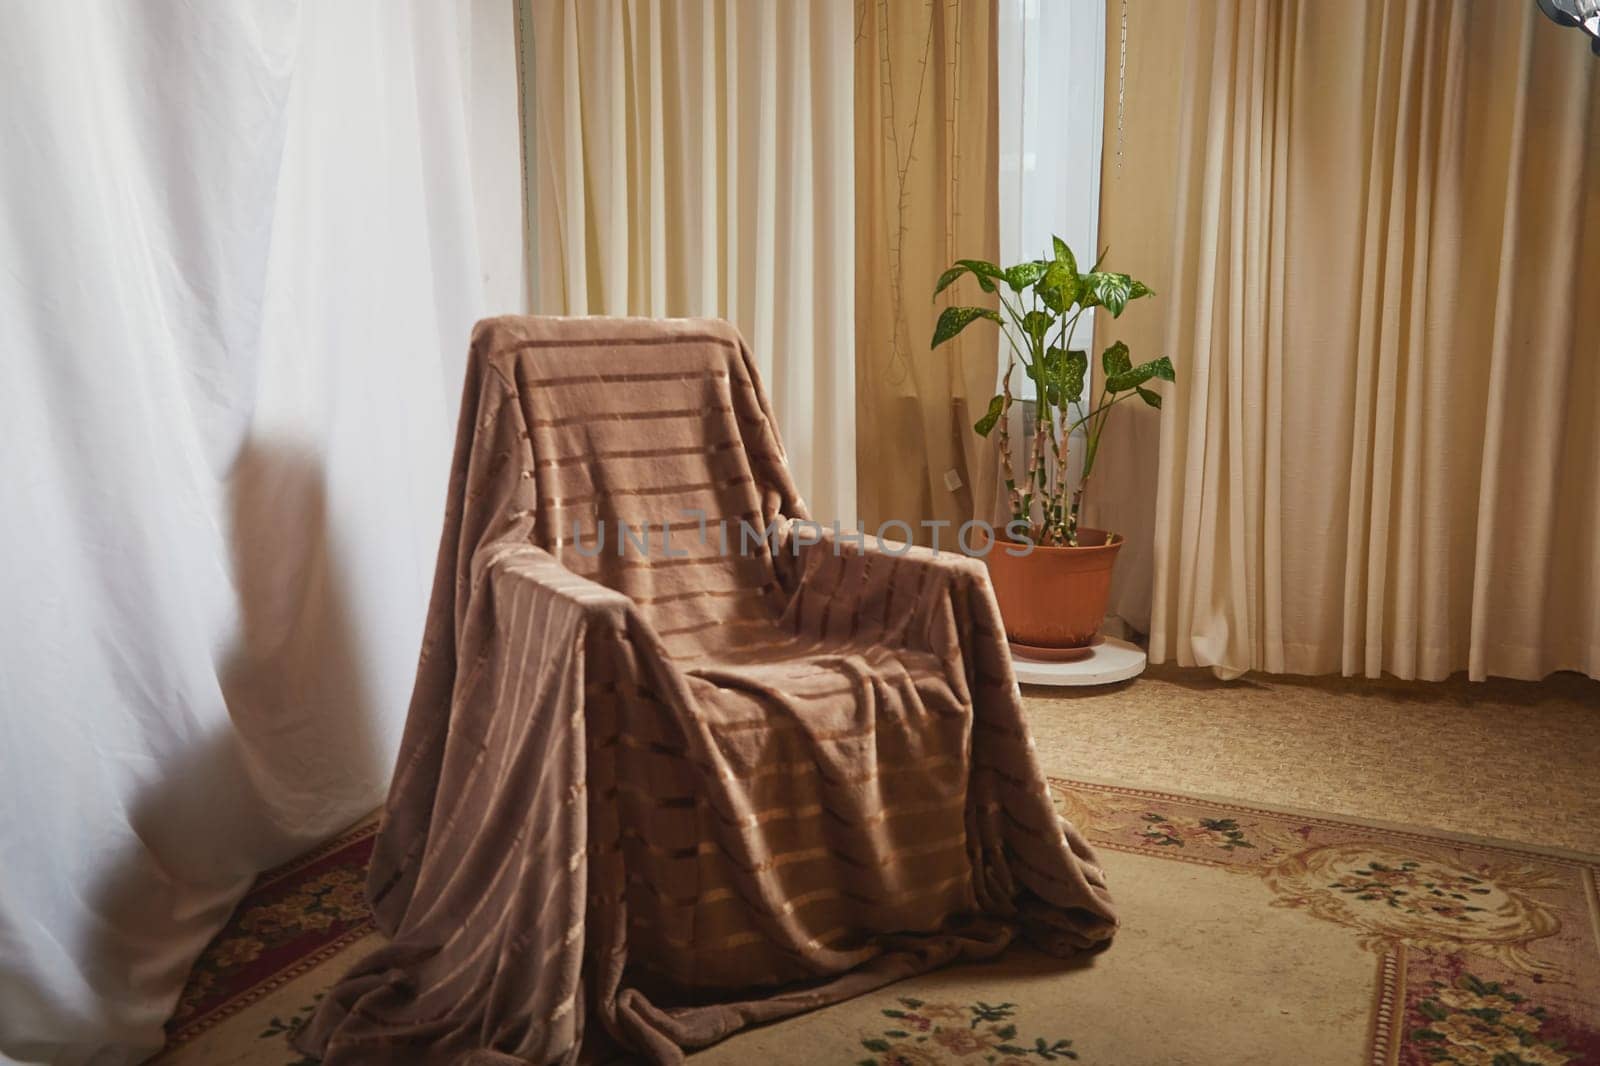 Living room with armchair, window, fabric curtains, home flower dieffenbachia and gentle light and lighting. Loft style in the interior. Background and location for photo shoot by keleny